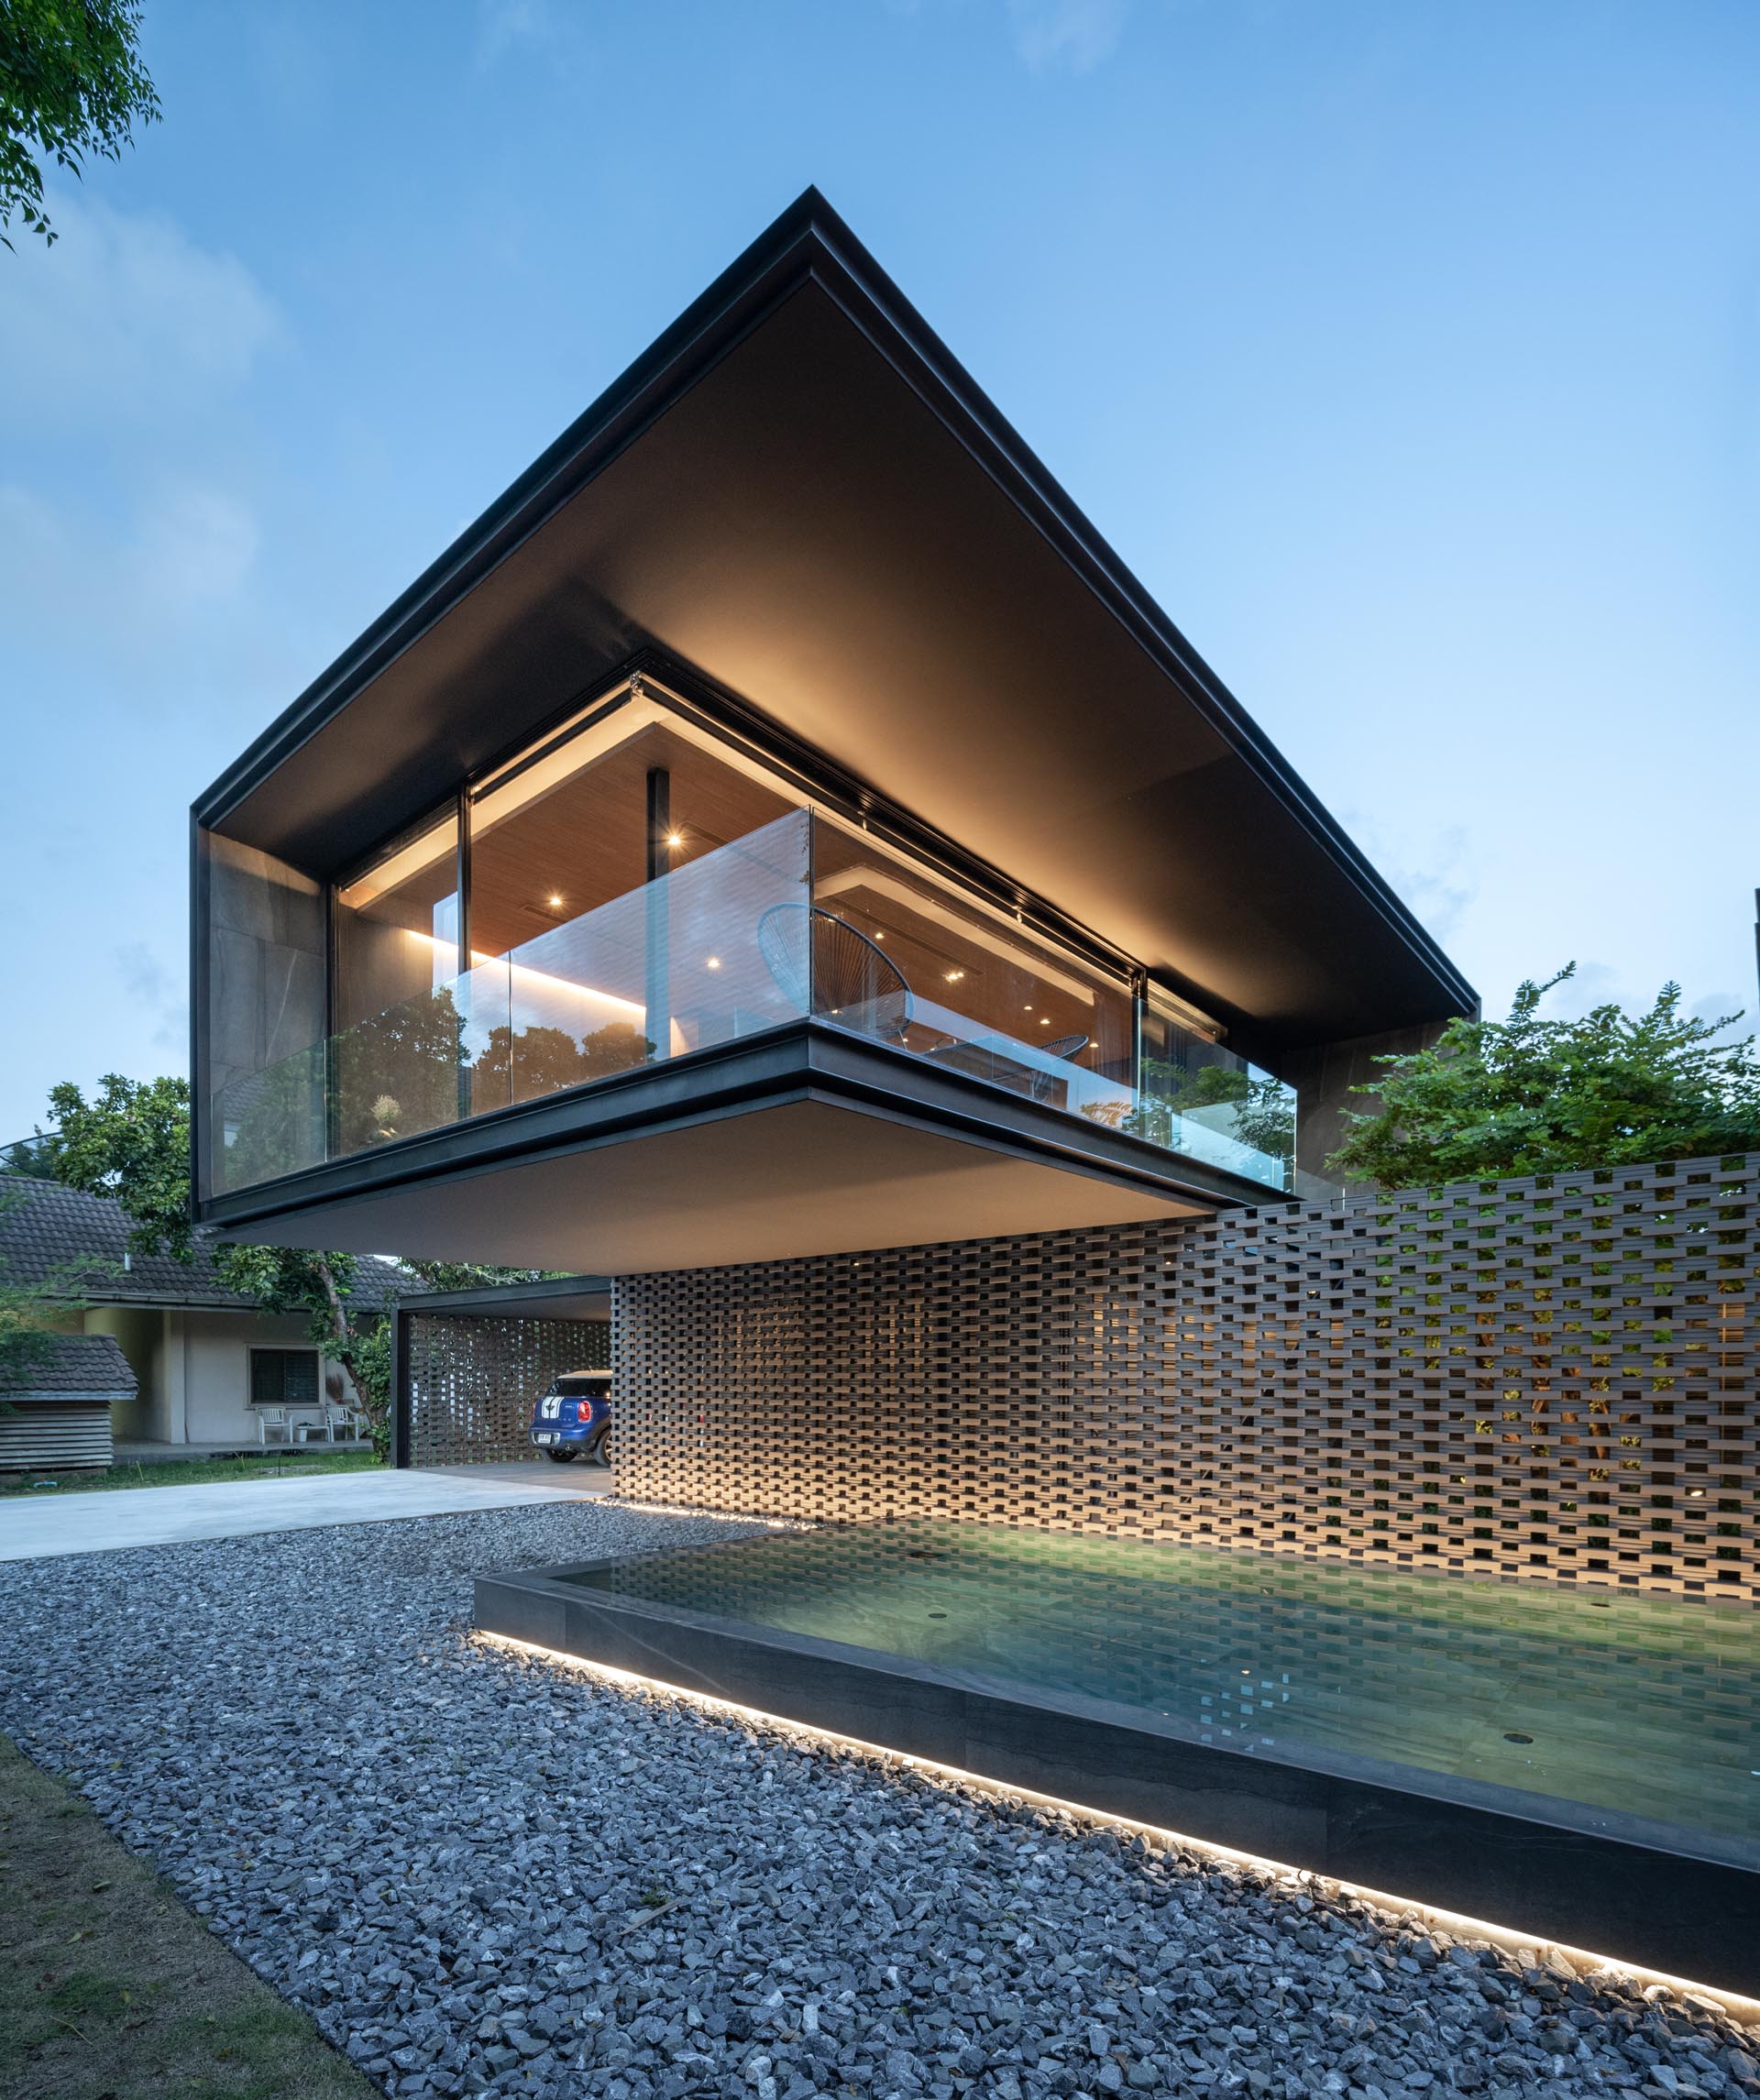 Lighting Is Important Design On This Modern House